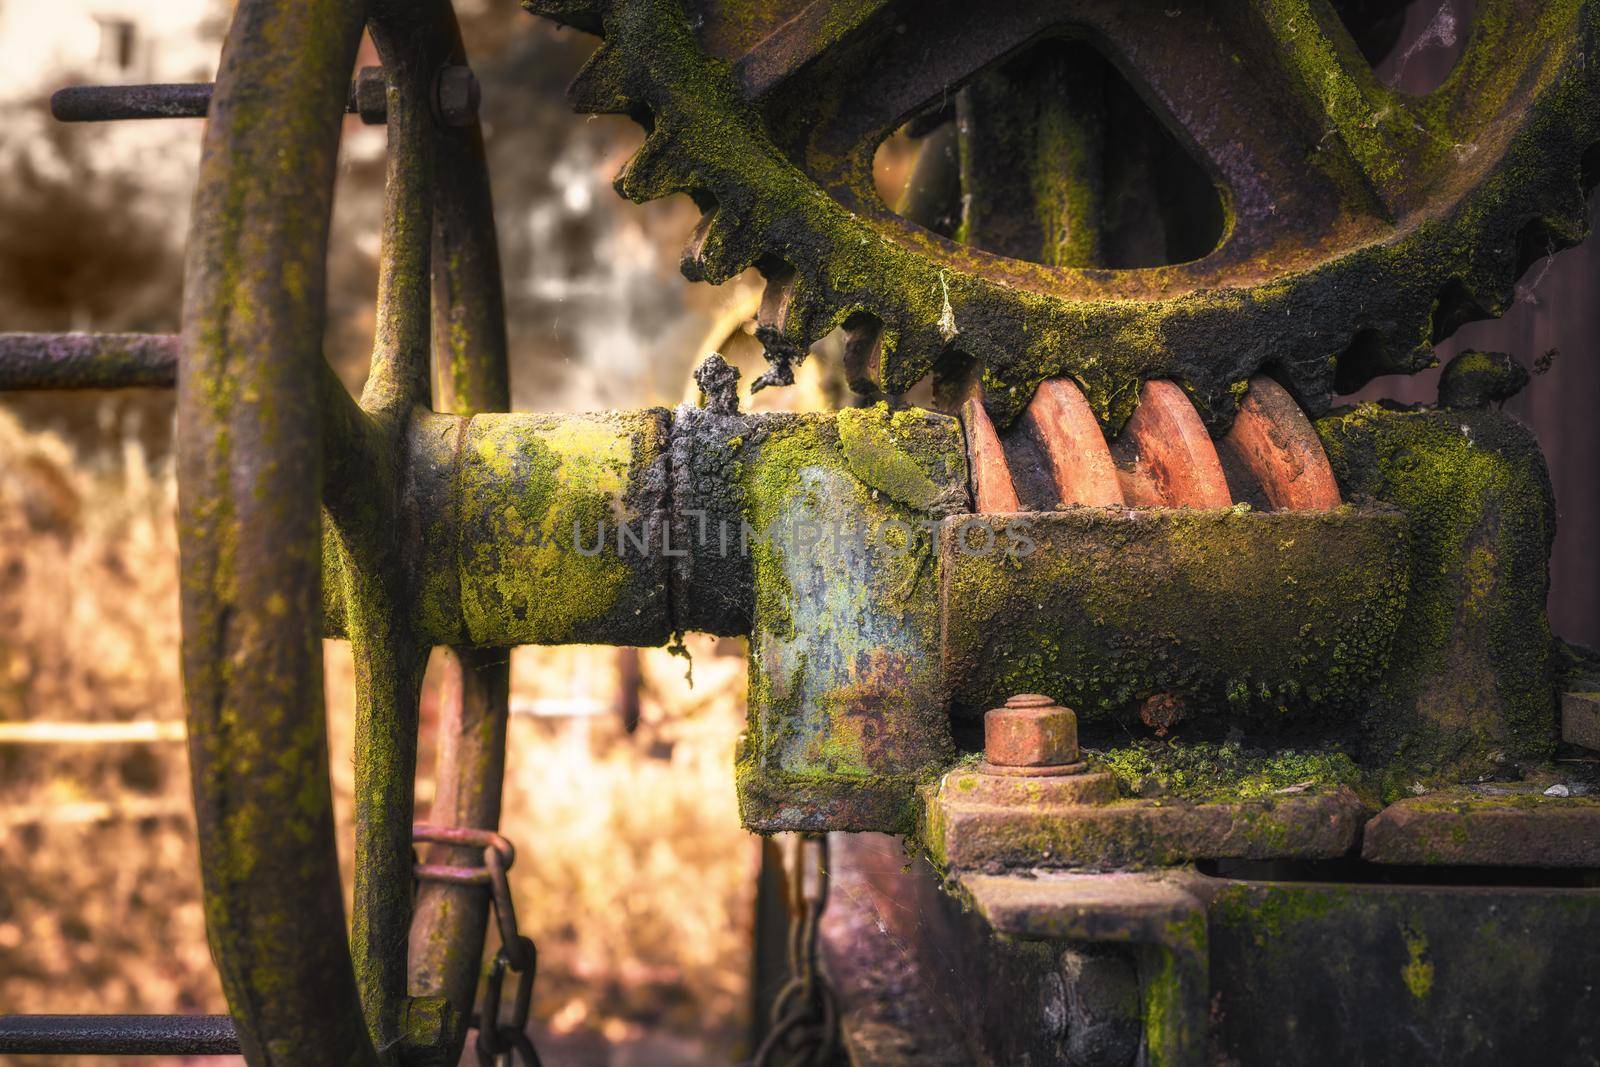 Rusty gears from a valve